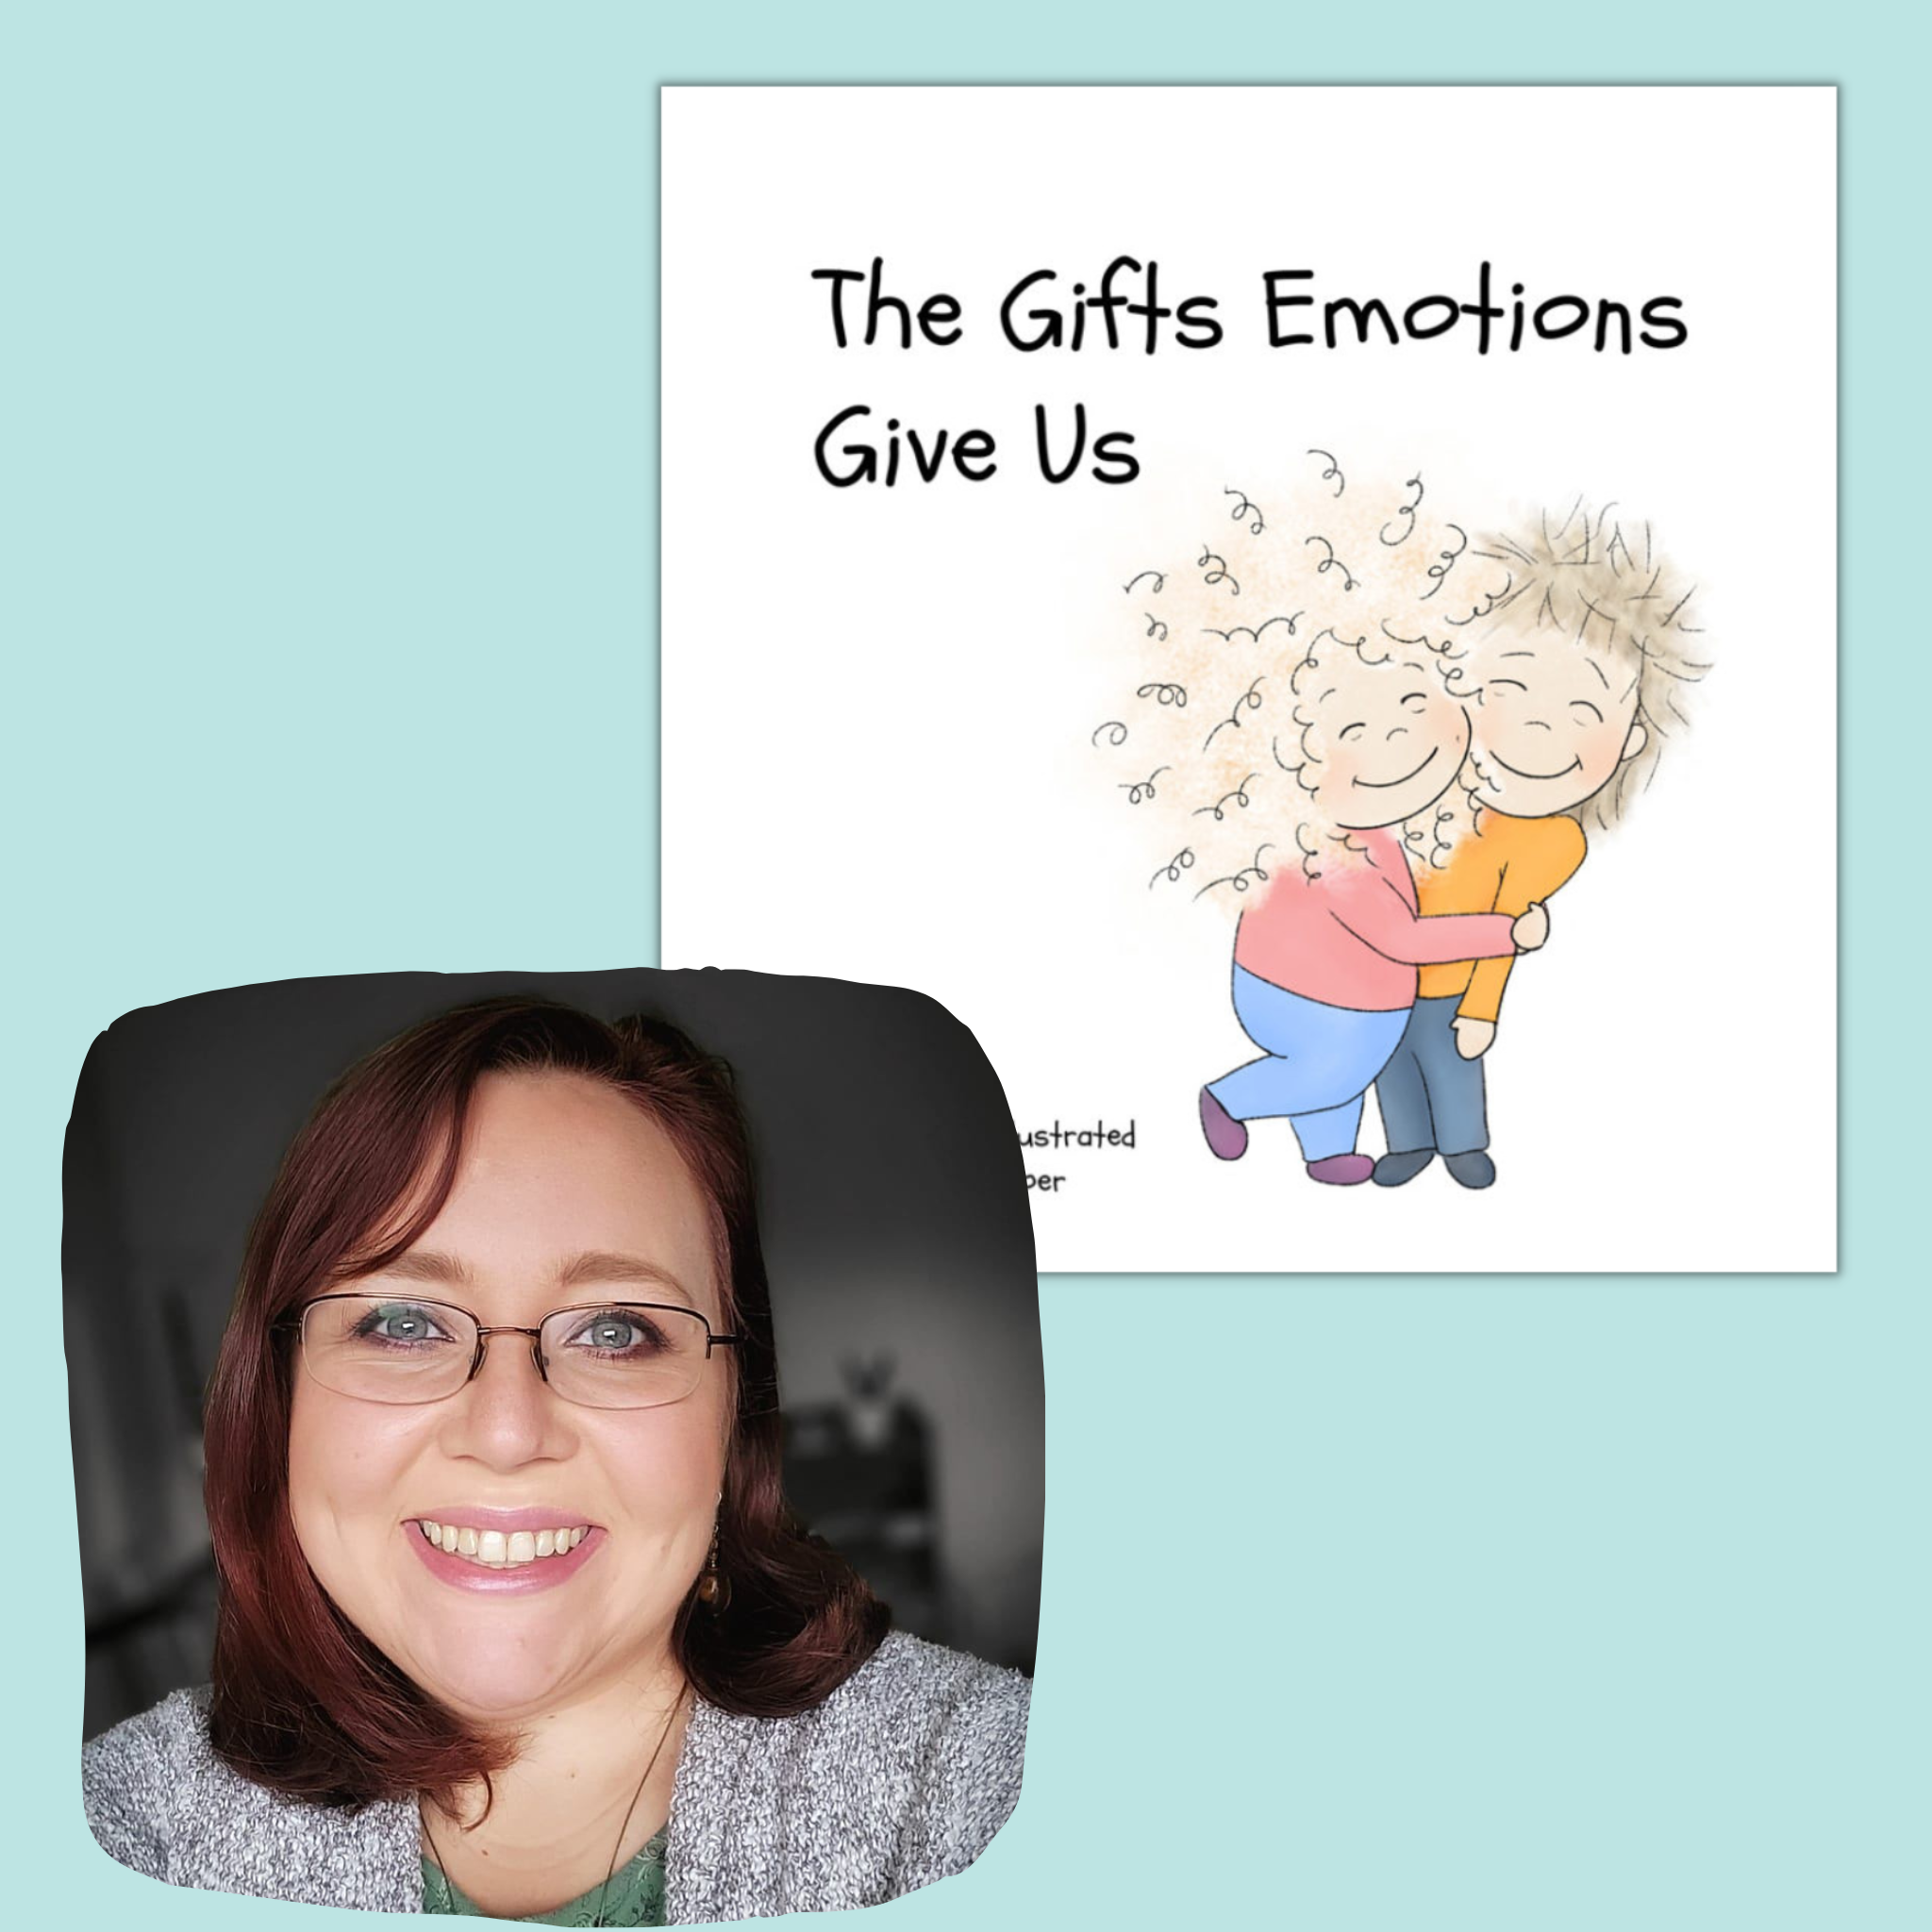 Becky Cooper from Be Kind Books and her self published picture book called "The Gifts Emotions Give Us" created and sold through Amazon KDP and Kindle Direct Publishing